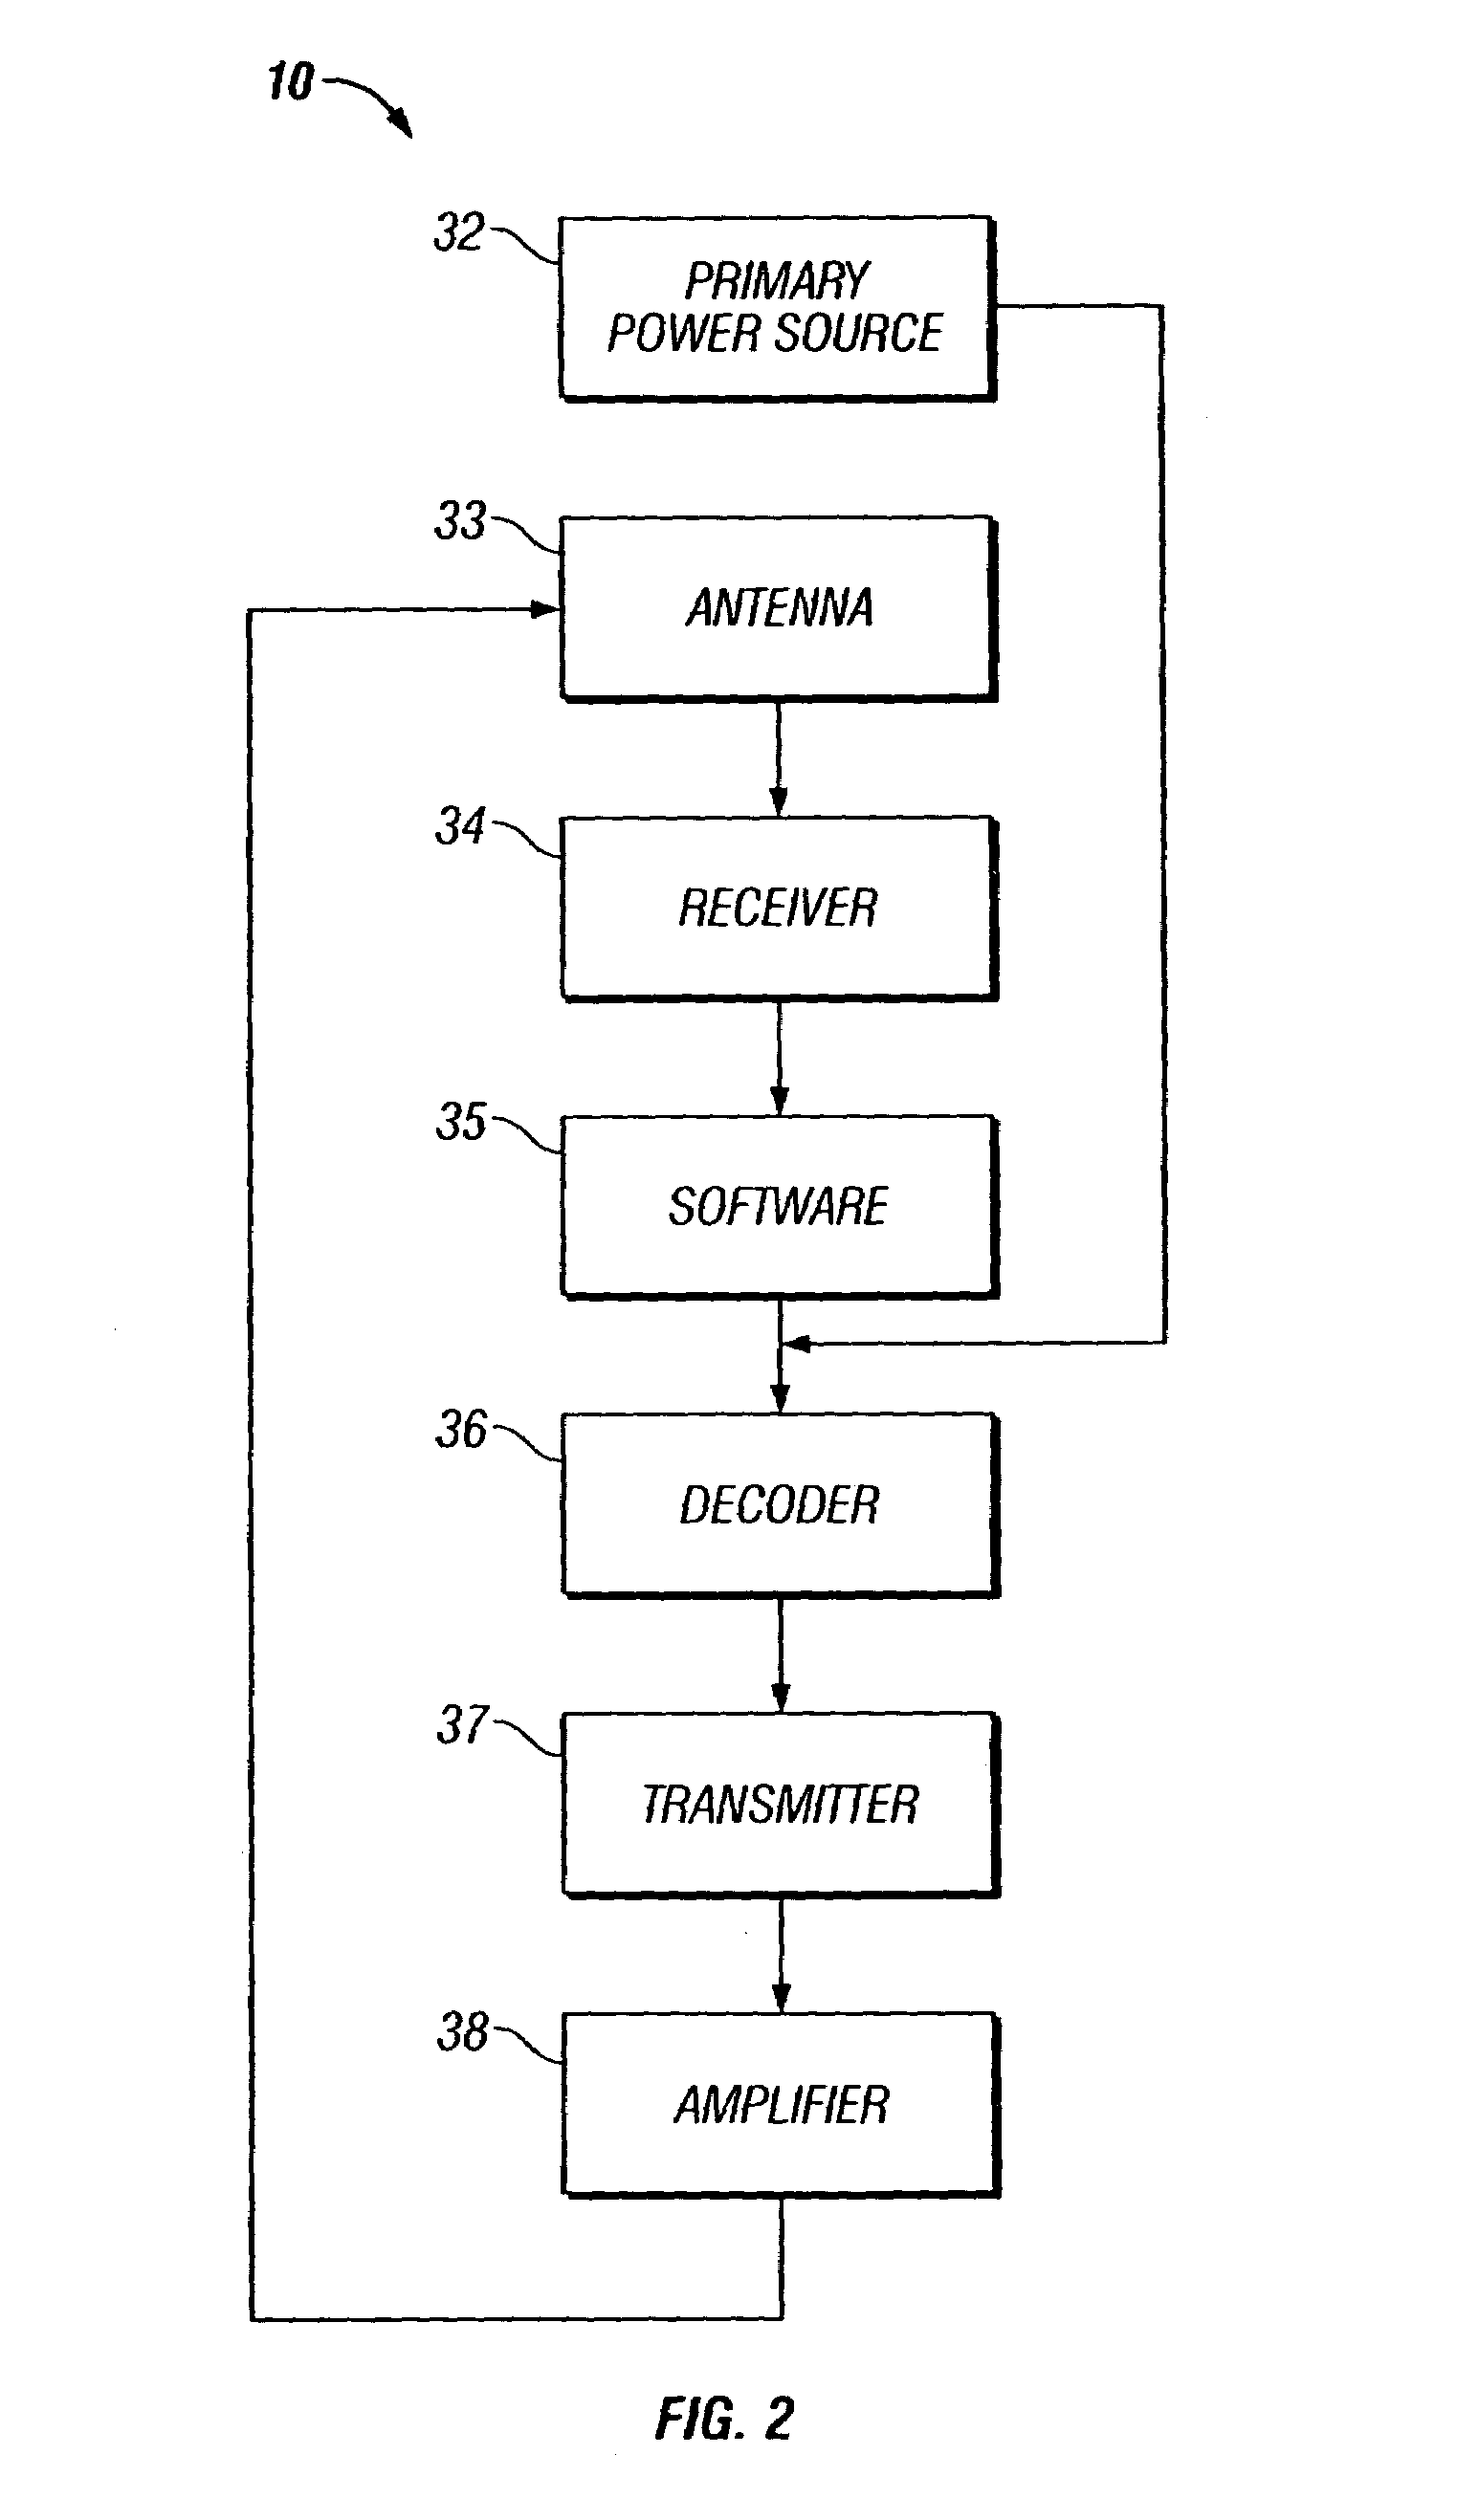 Method and apparatus for locating and tracking persons